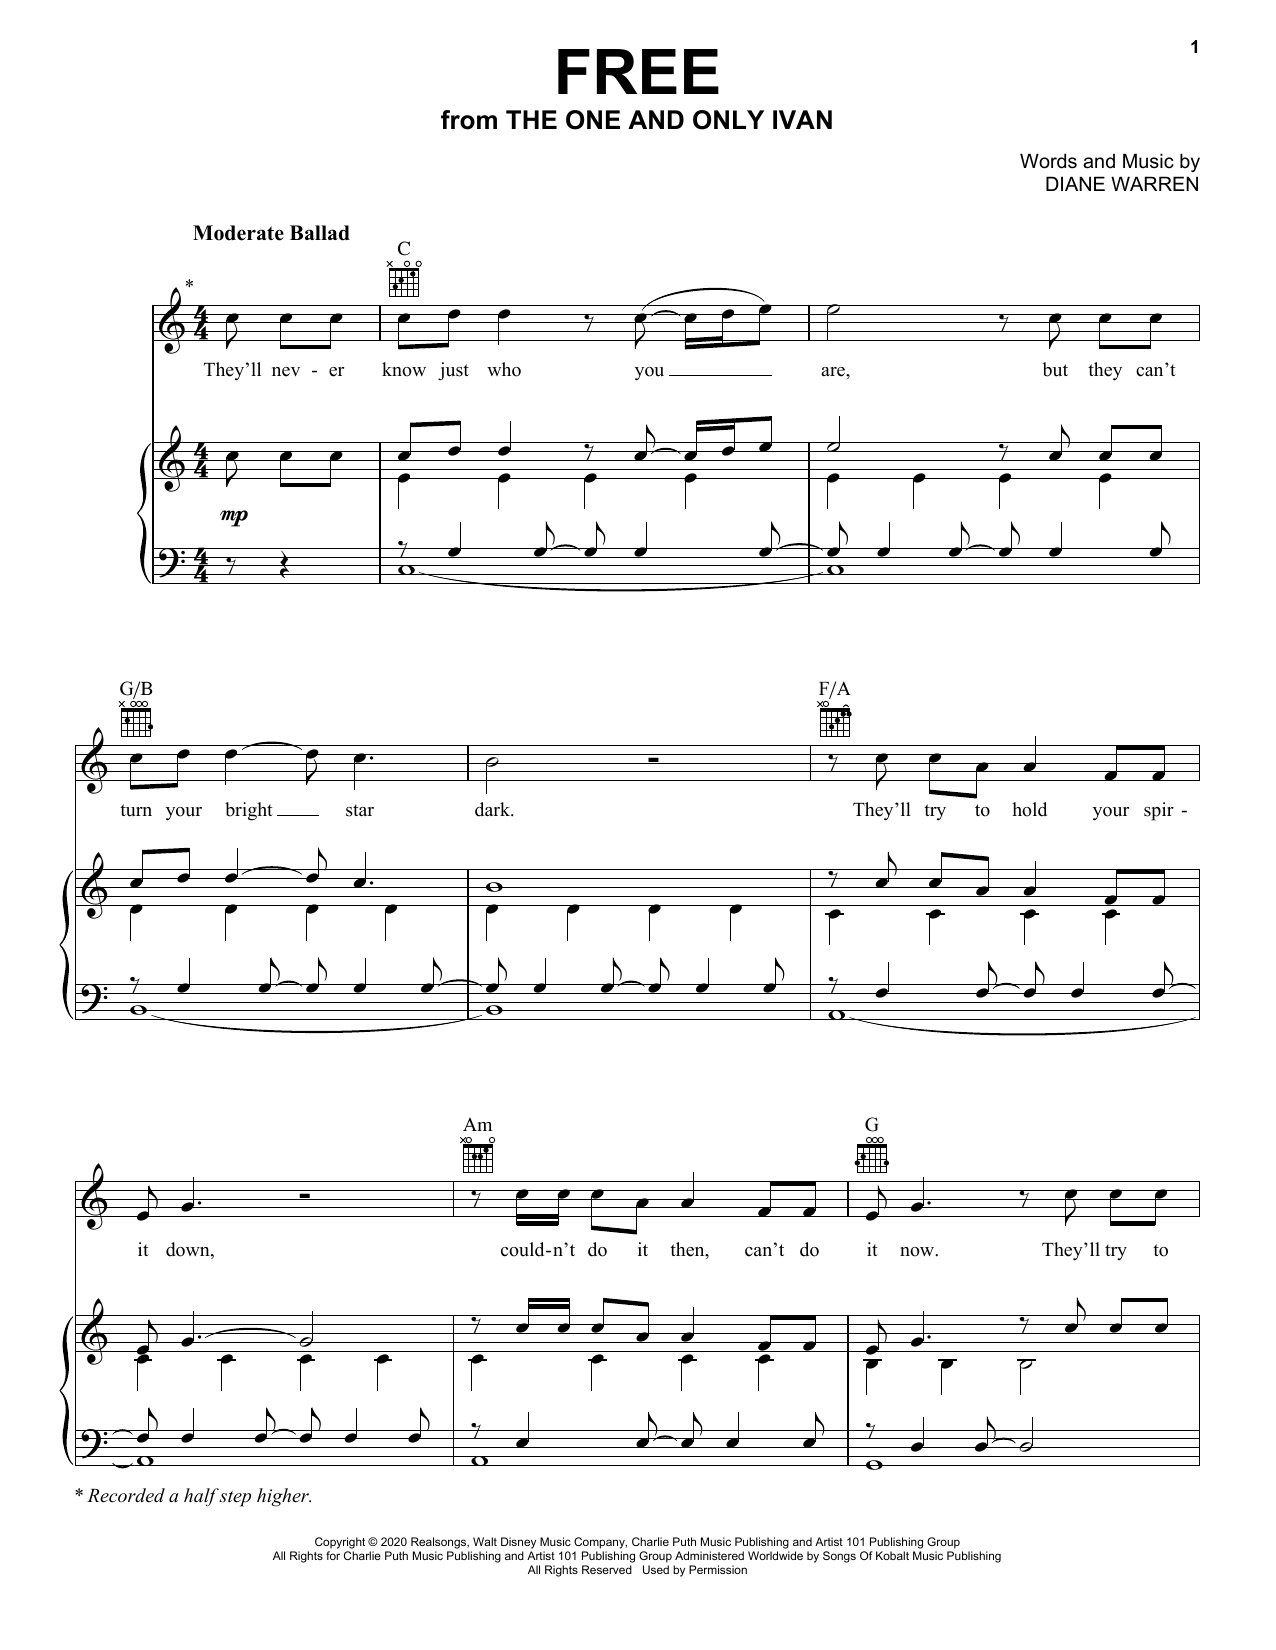 Charlie Puth "Free (from Disney's One Only Ivan)" Sheet Music Notes | Download PDF Score Printable